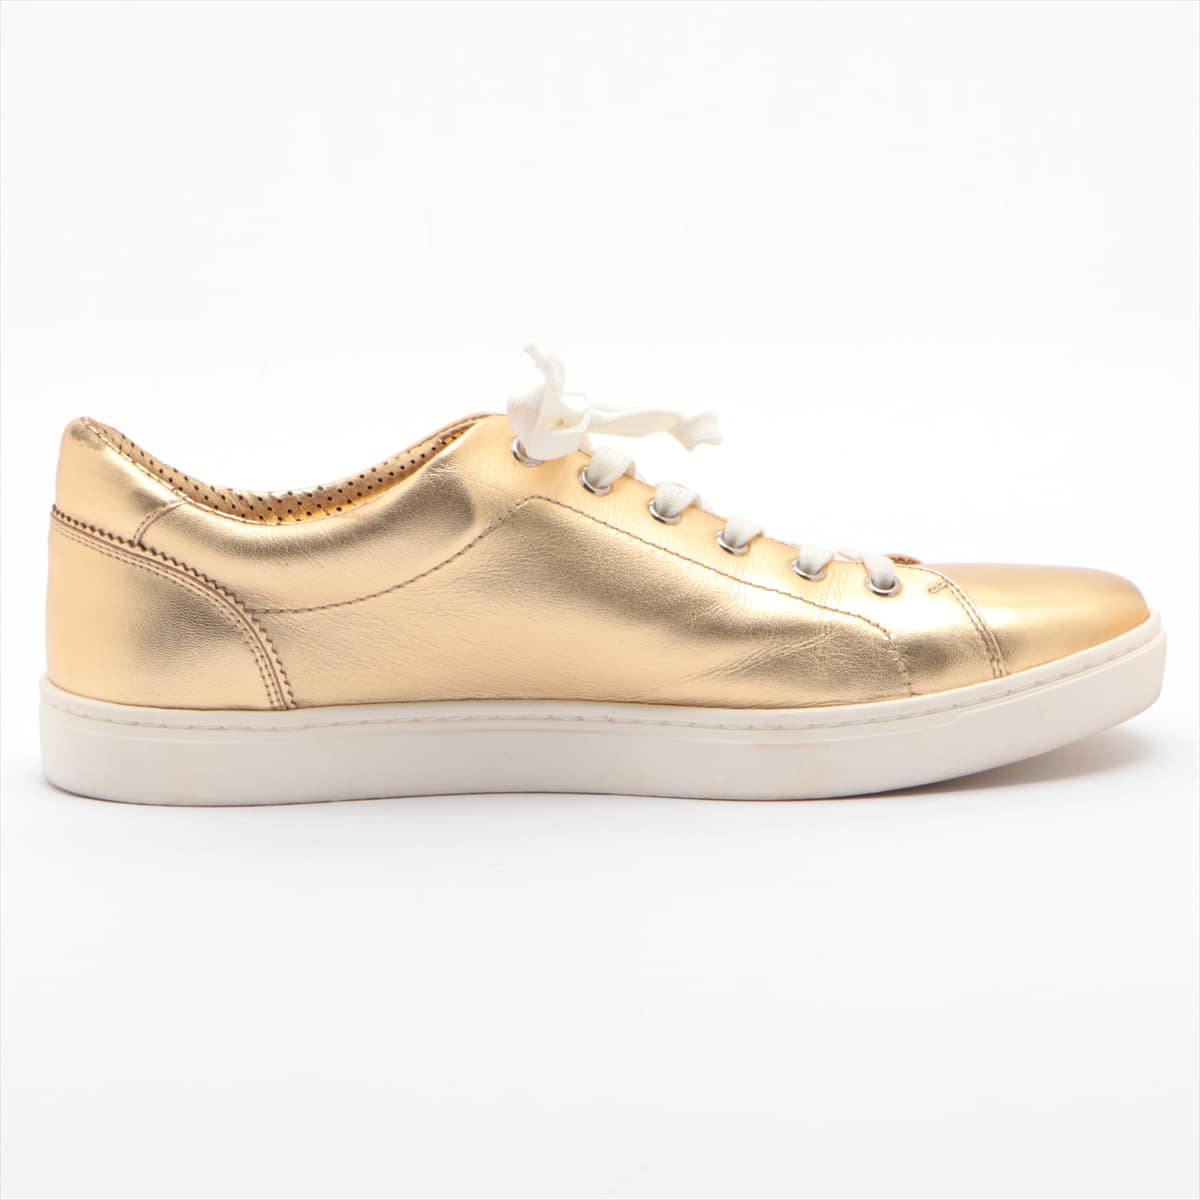 Dolce & Gabbana Leather Sneakers 8.5 Men's Gold